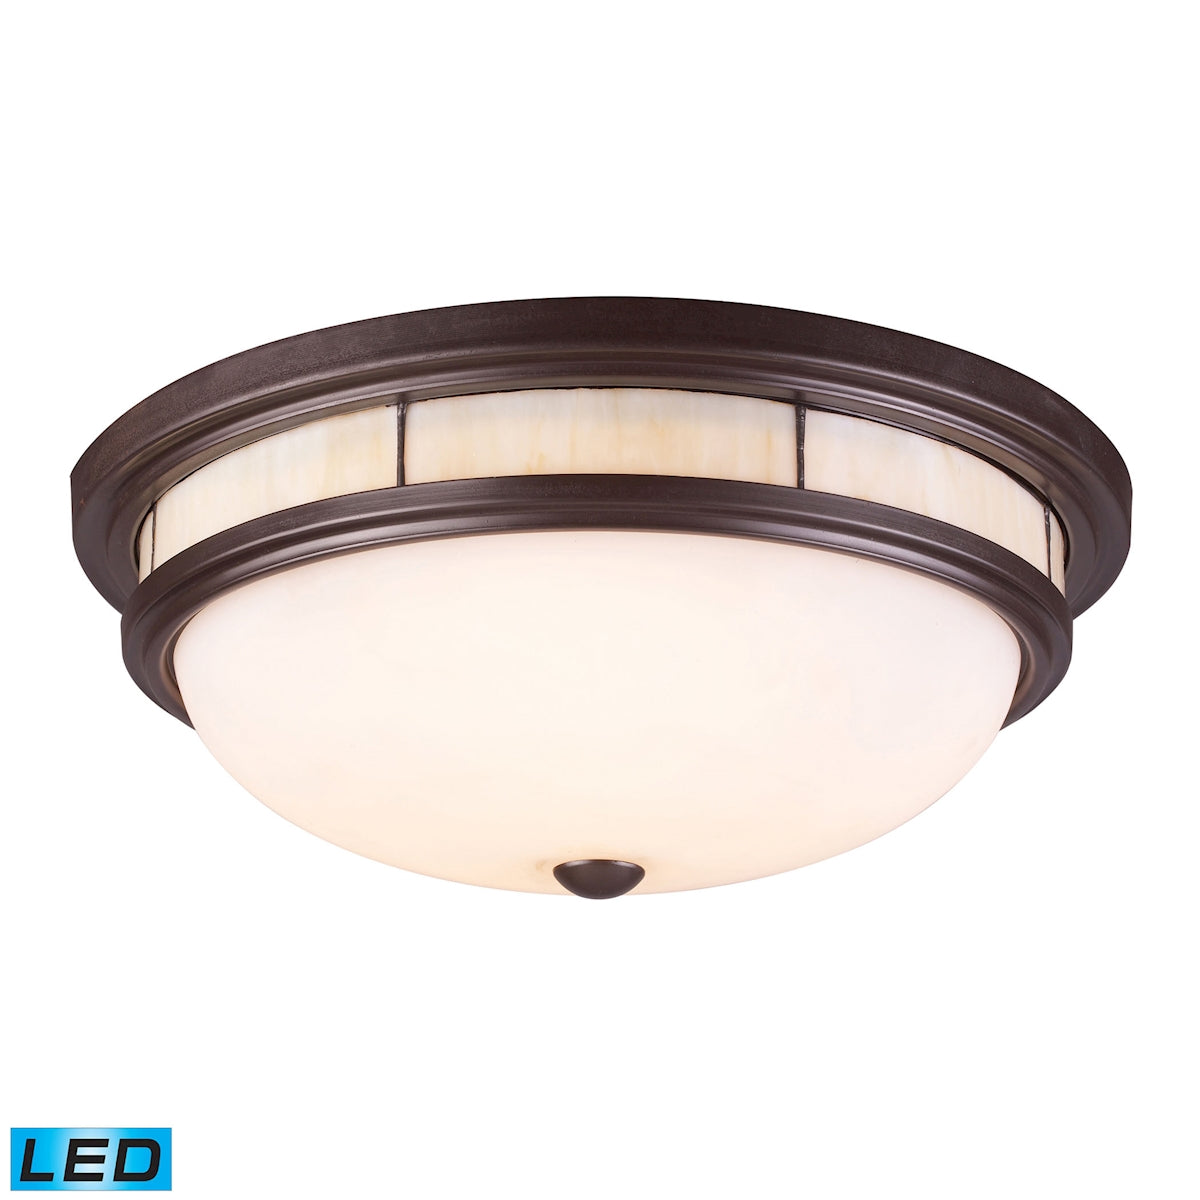 ELK Lighting 70014-3-LED Tiffany 3-Light Flush Mount in Oiled Bronze with Glass Shade and Panels - Includes LED Bulbs